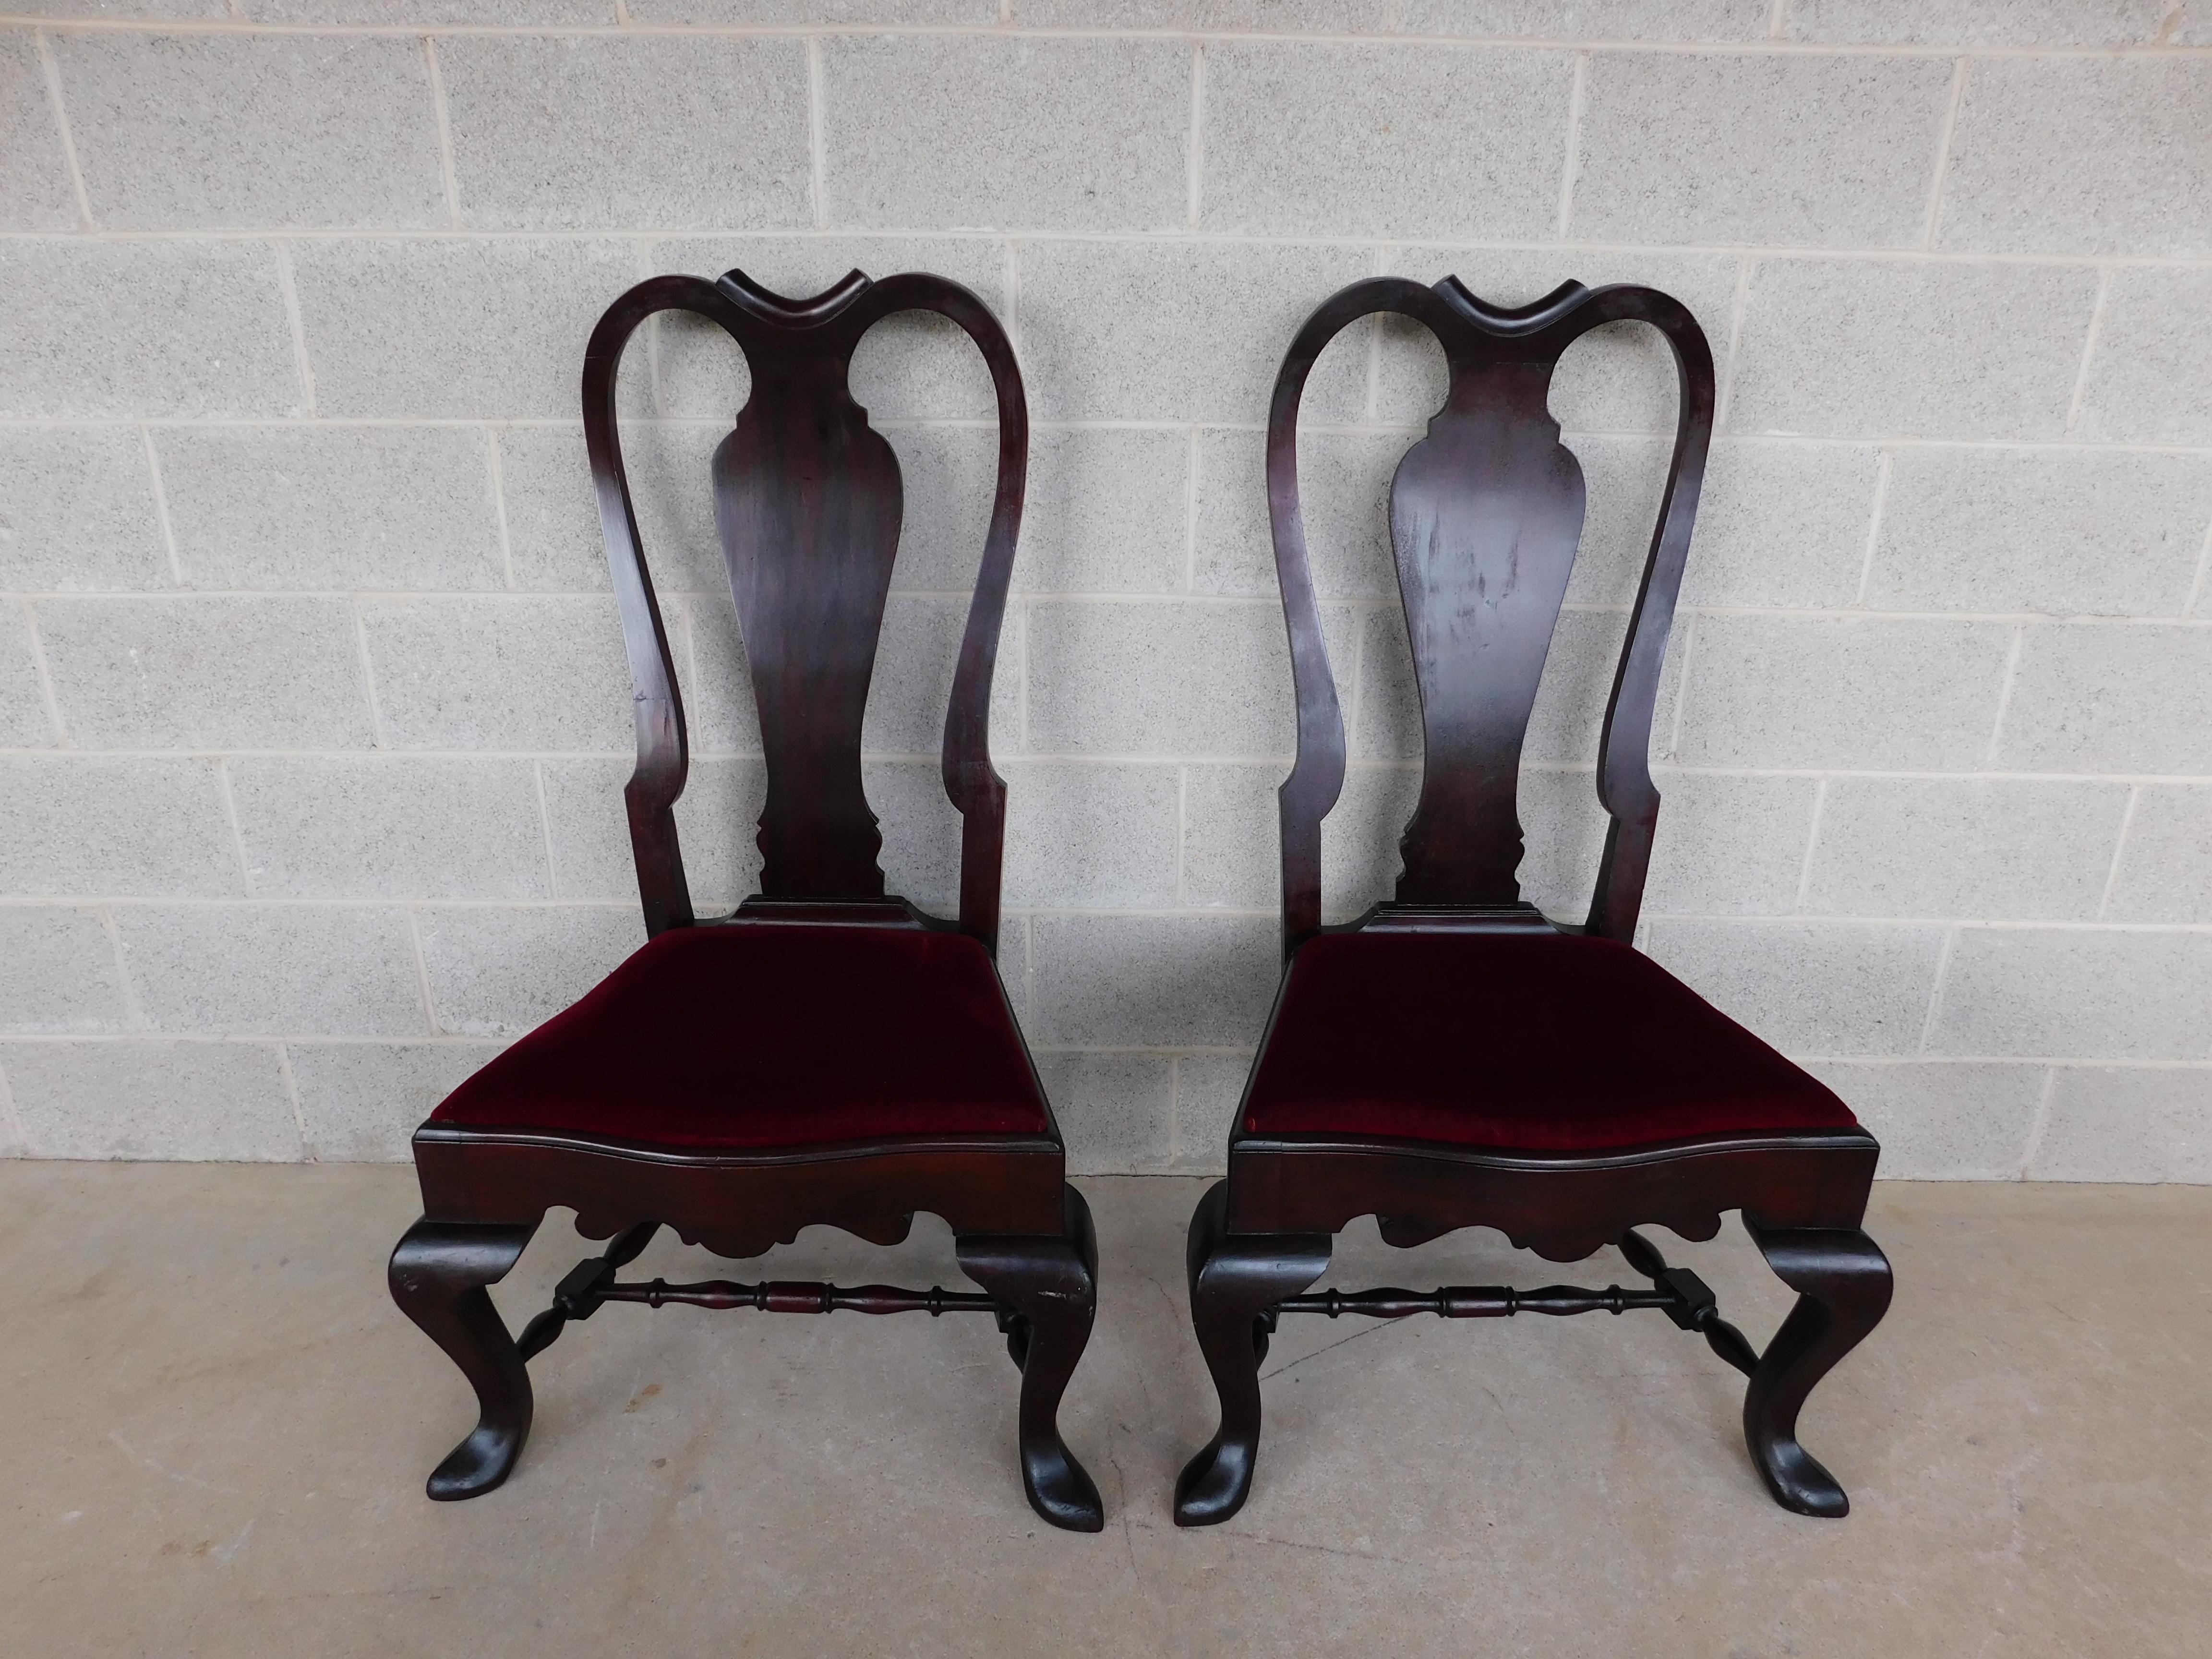 ( Hand Crafted in Philadelphia )

Features Fine Quality Solid Hand Made Construction, Oversized Queen Anne Room Corner or Accent Chairs, age approx 100 years old.

Original Condition, original finish, Original Upholstery with Stuffing and Straps